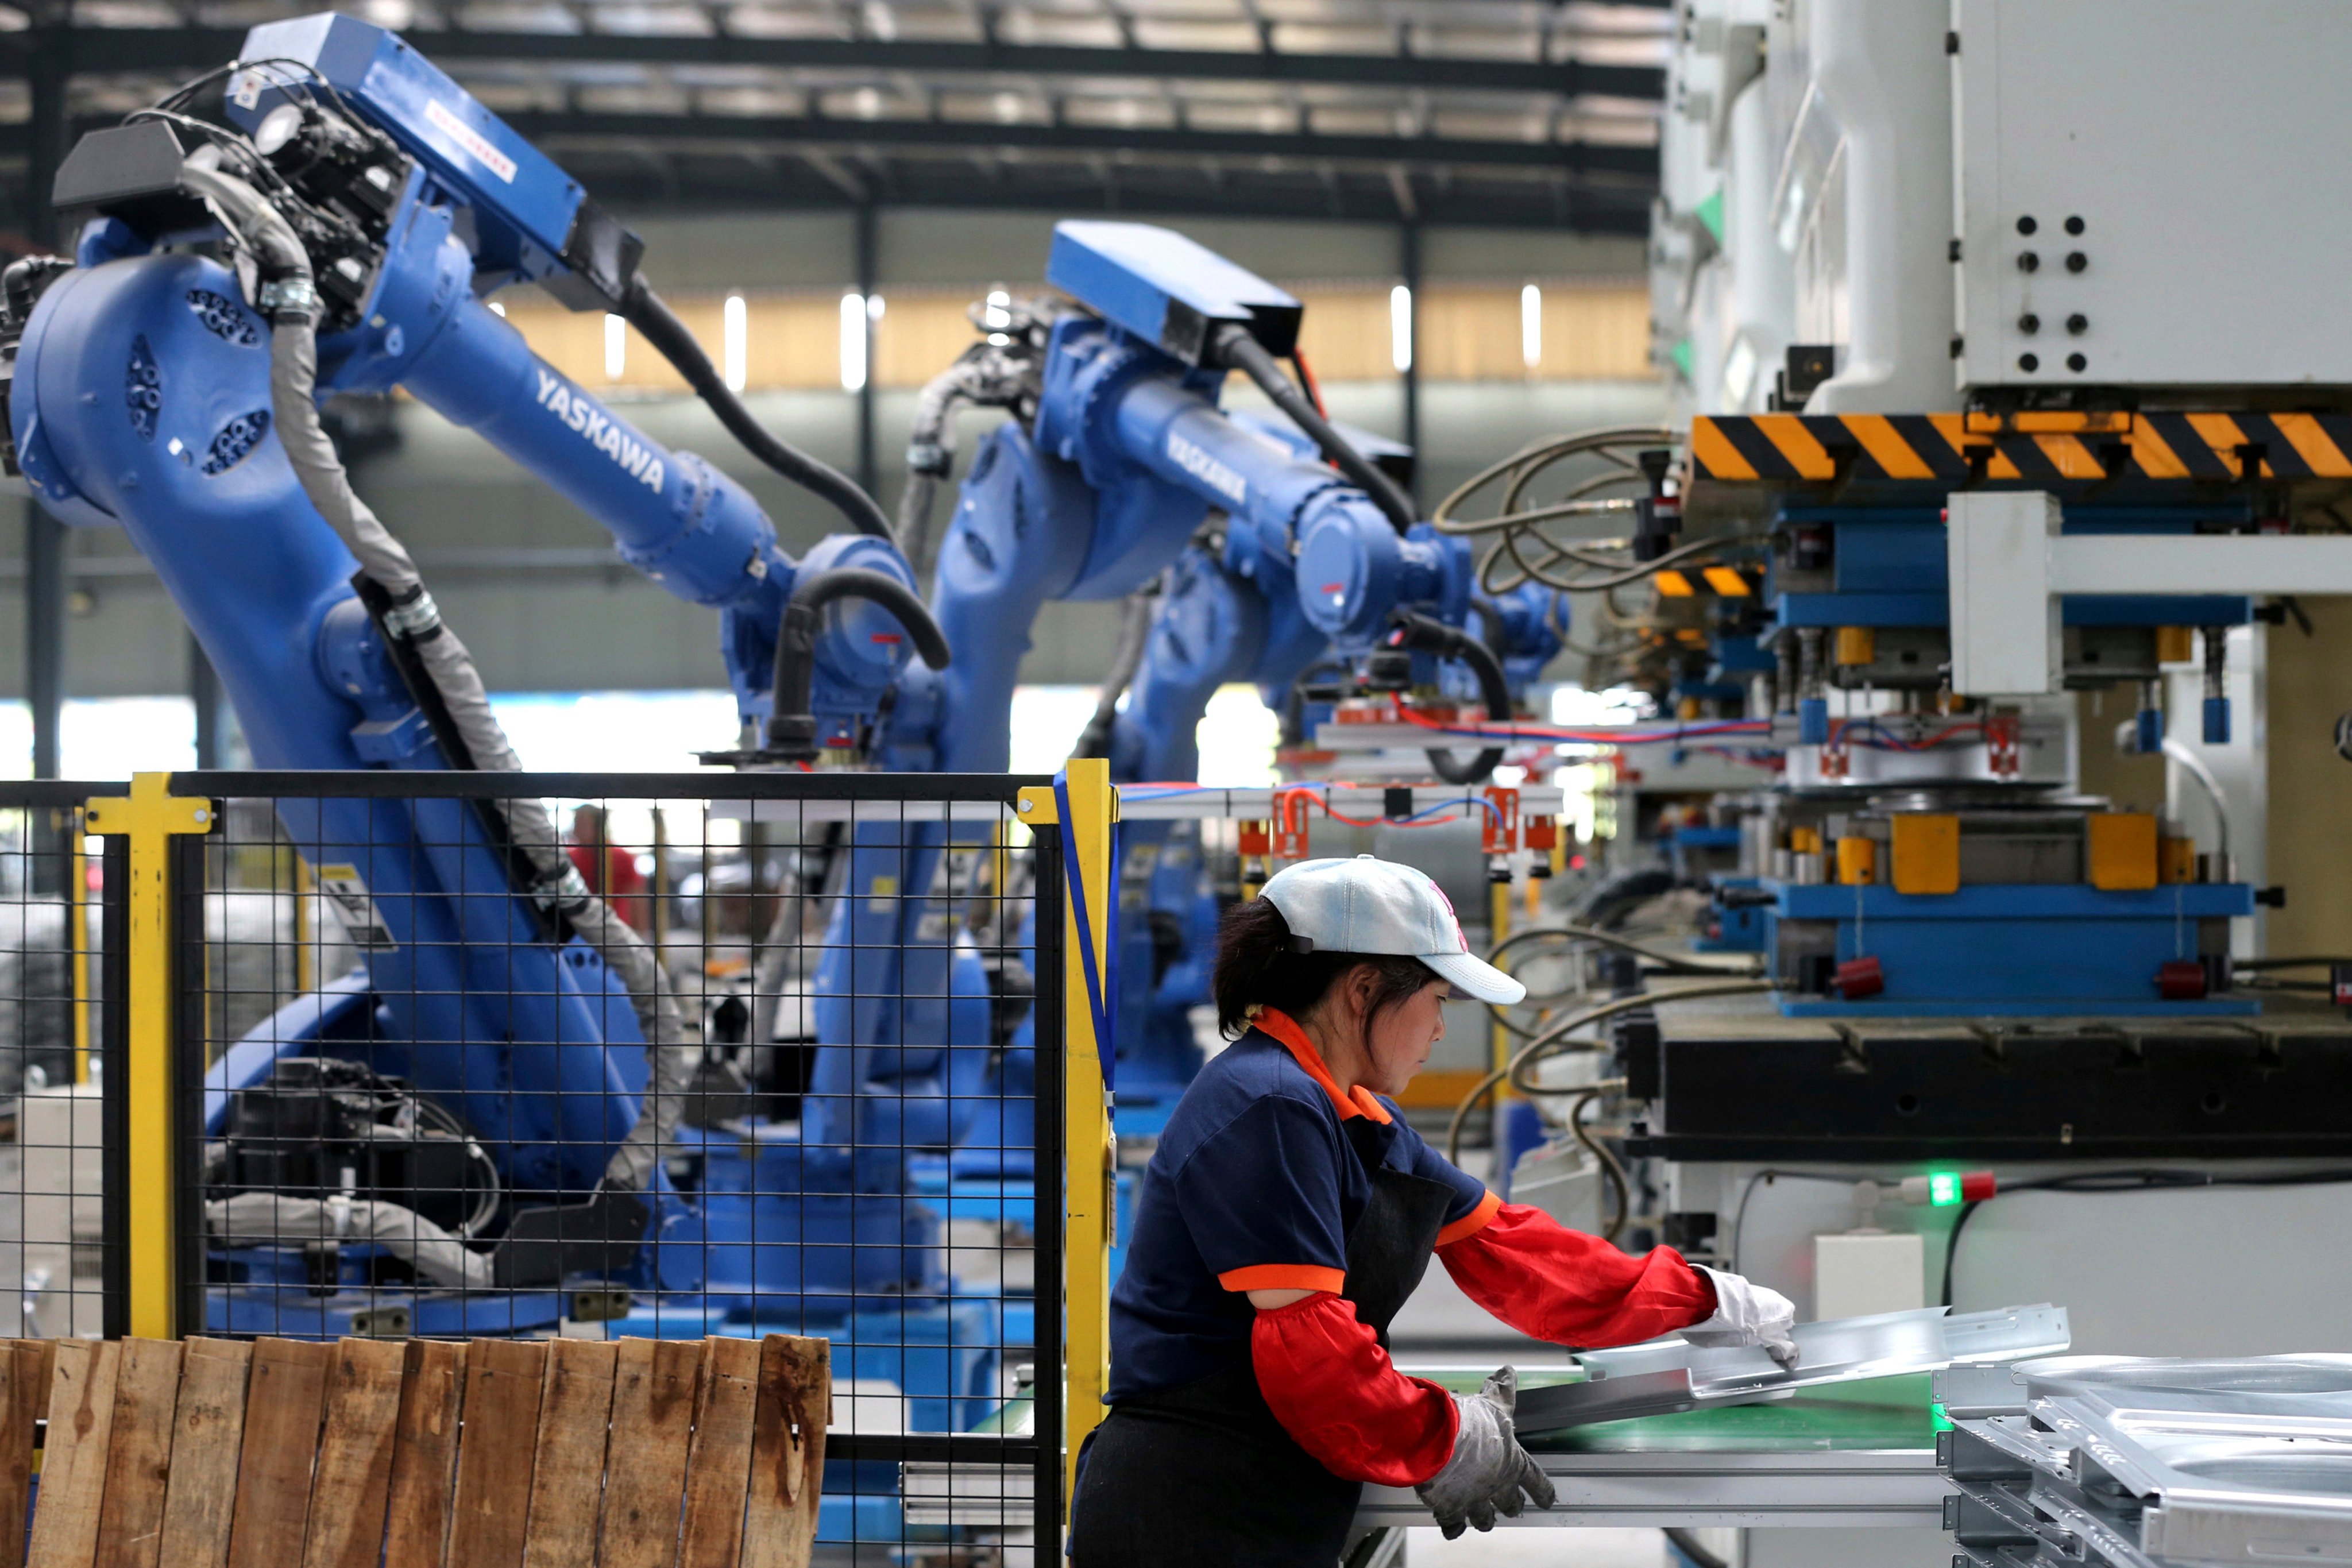 The production and deployment rates of robotics in Chinese manufacturing are increasingly rapidly compared with other countries, according to a new report from an independent US think tank. Photo: AP